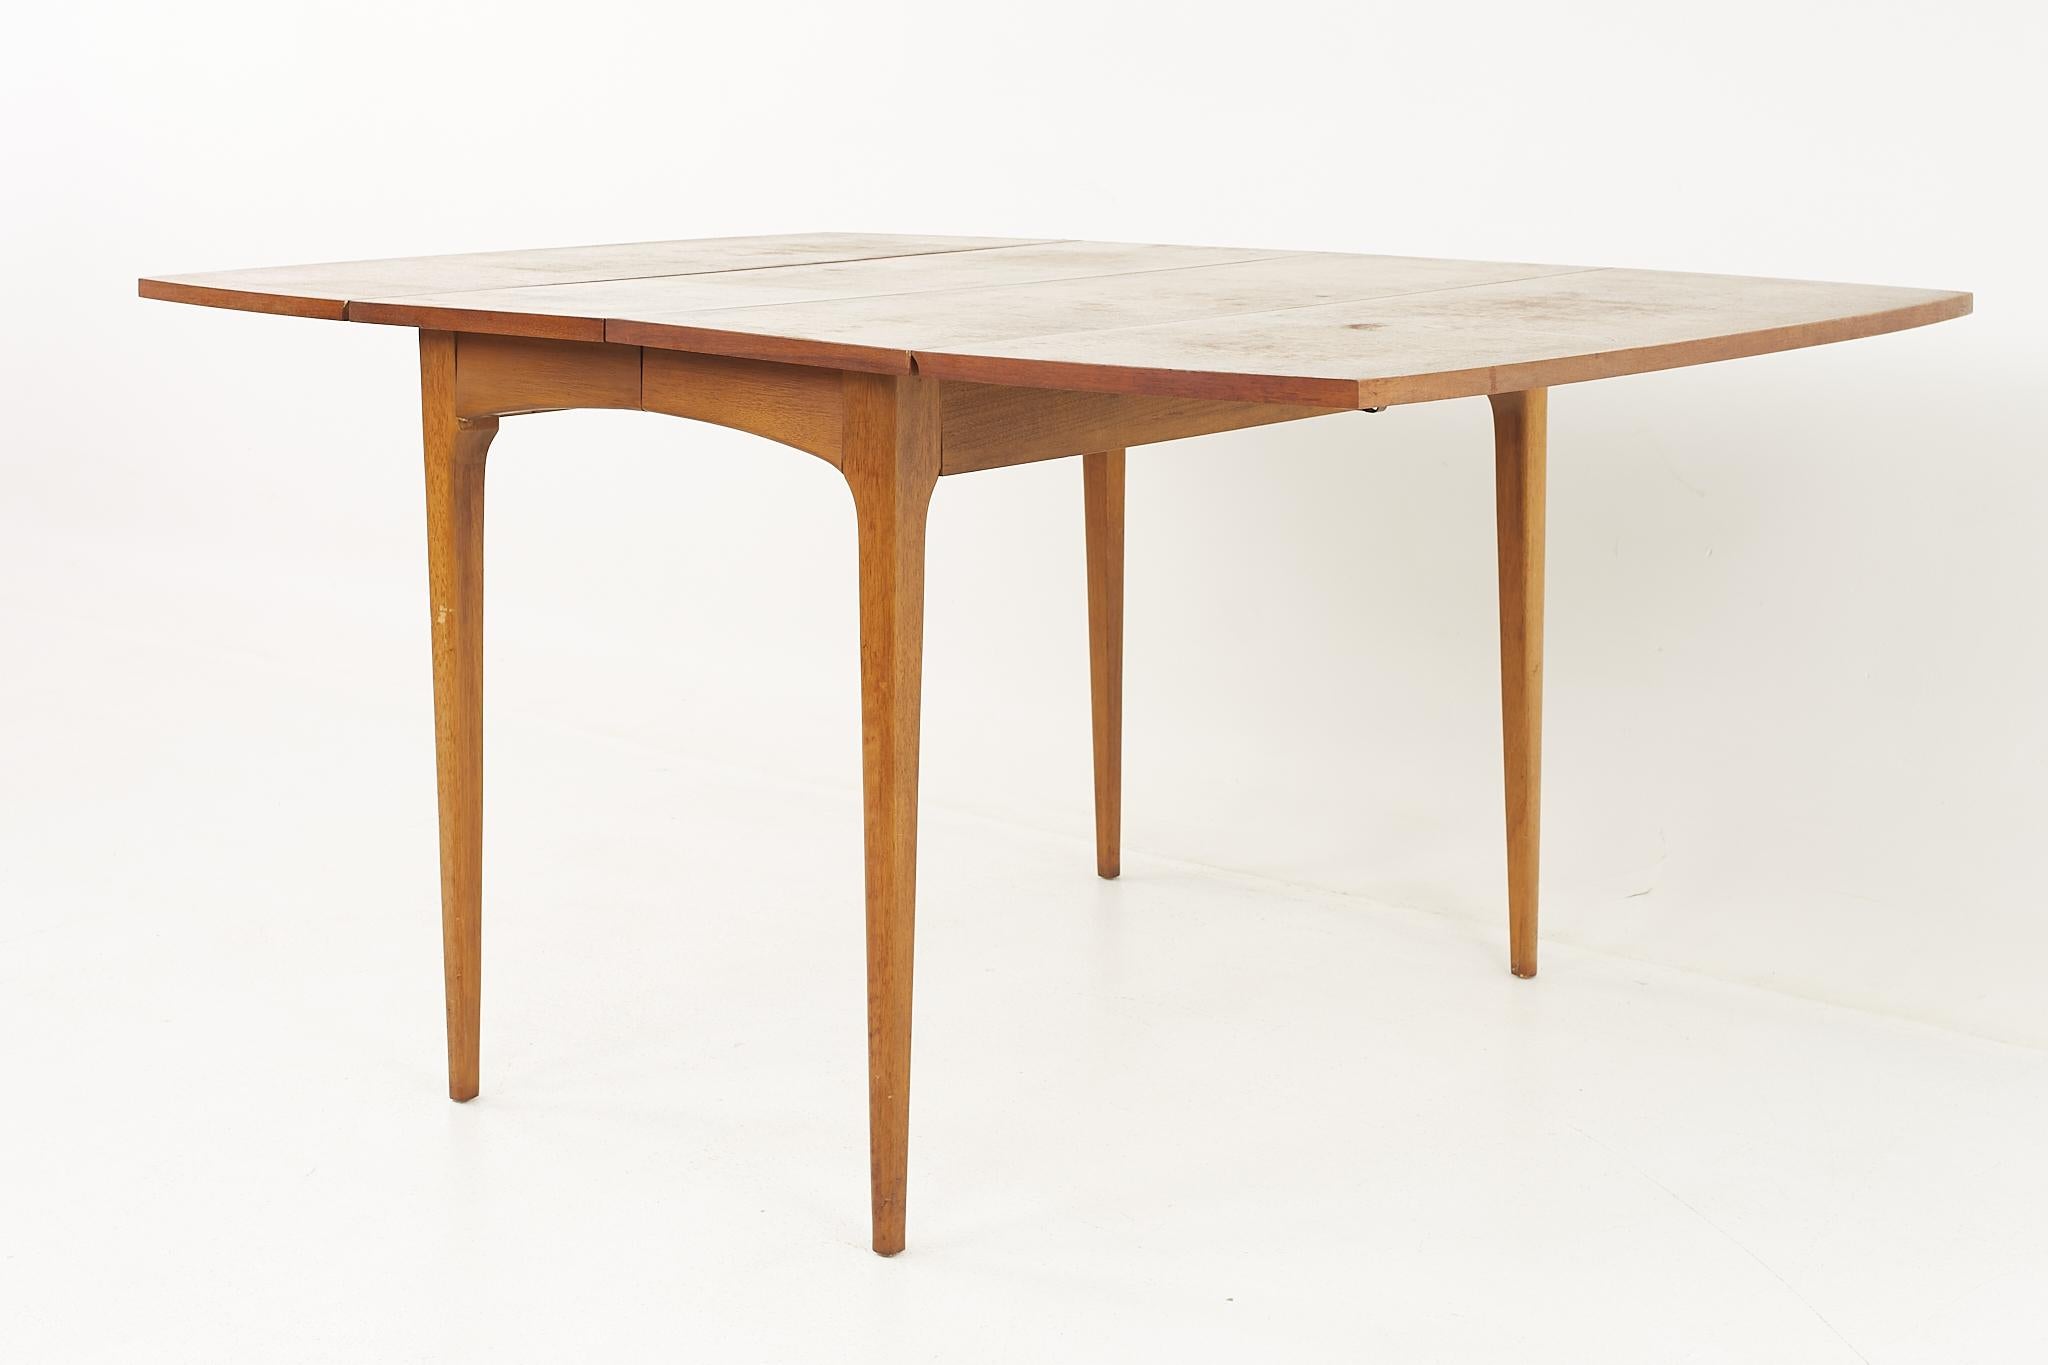 Lane Rhythm Mid-Century Walnut Drop Leaf Expanding Dining Table with 2 Leaves In Good Condition For Sale In Countryside, IL